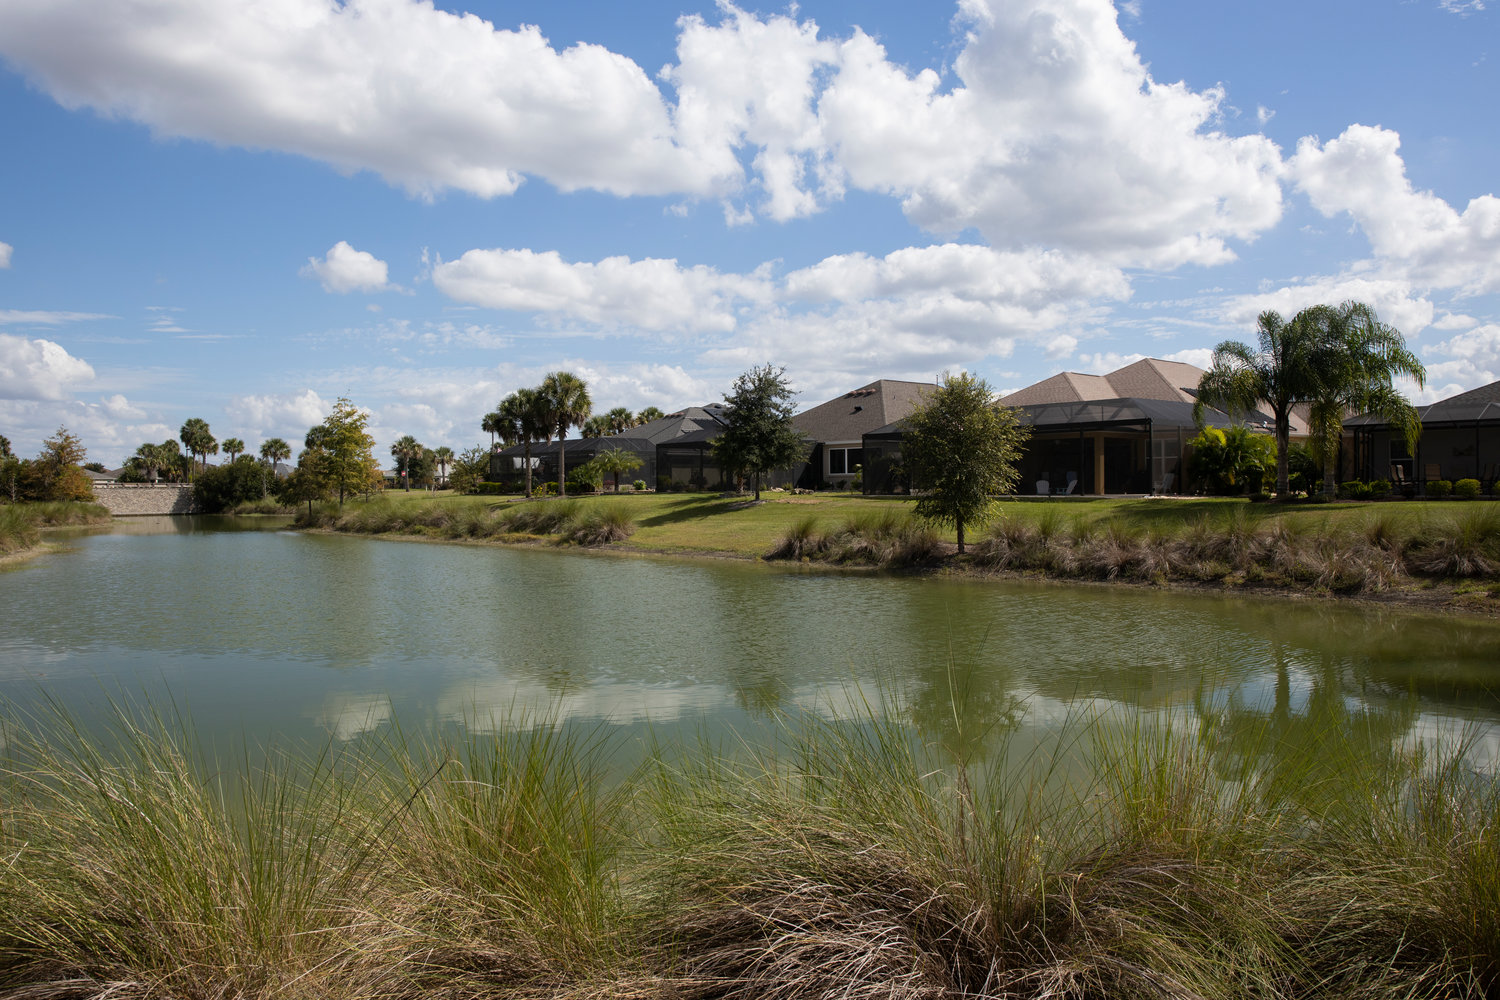 Rentention pond in a neighborhood in the Villages.